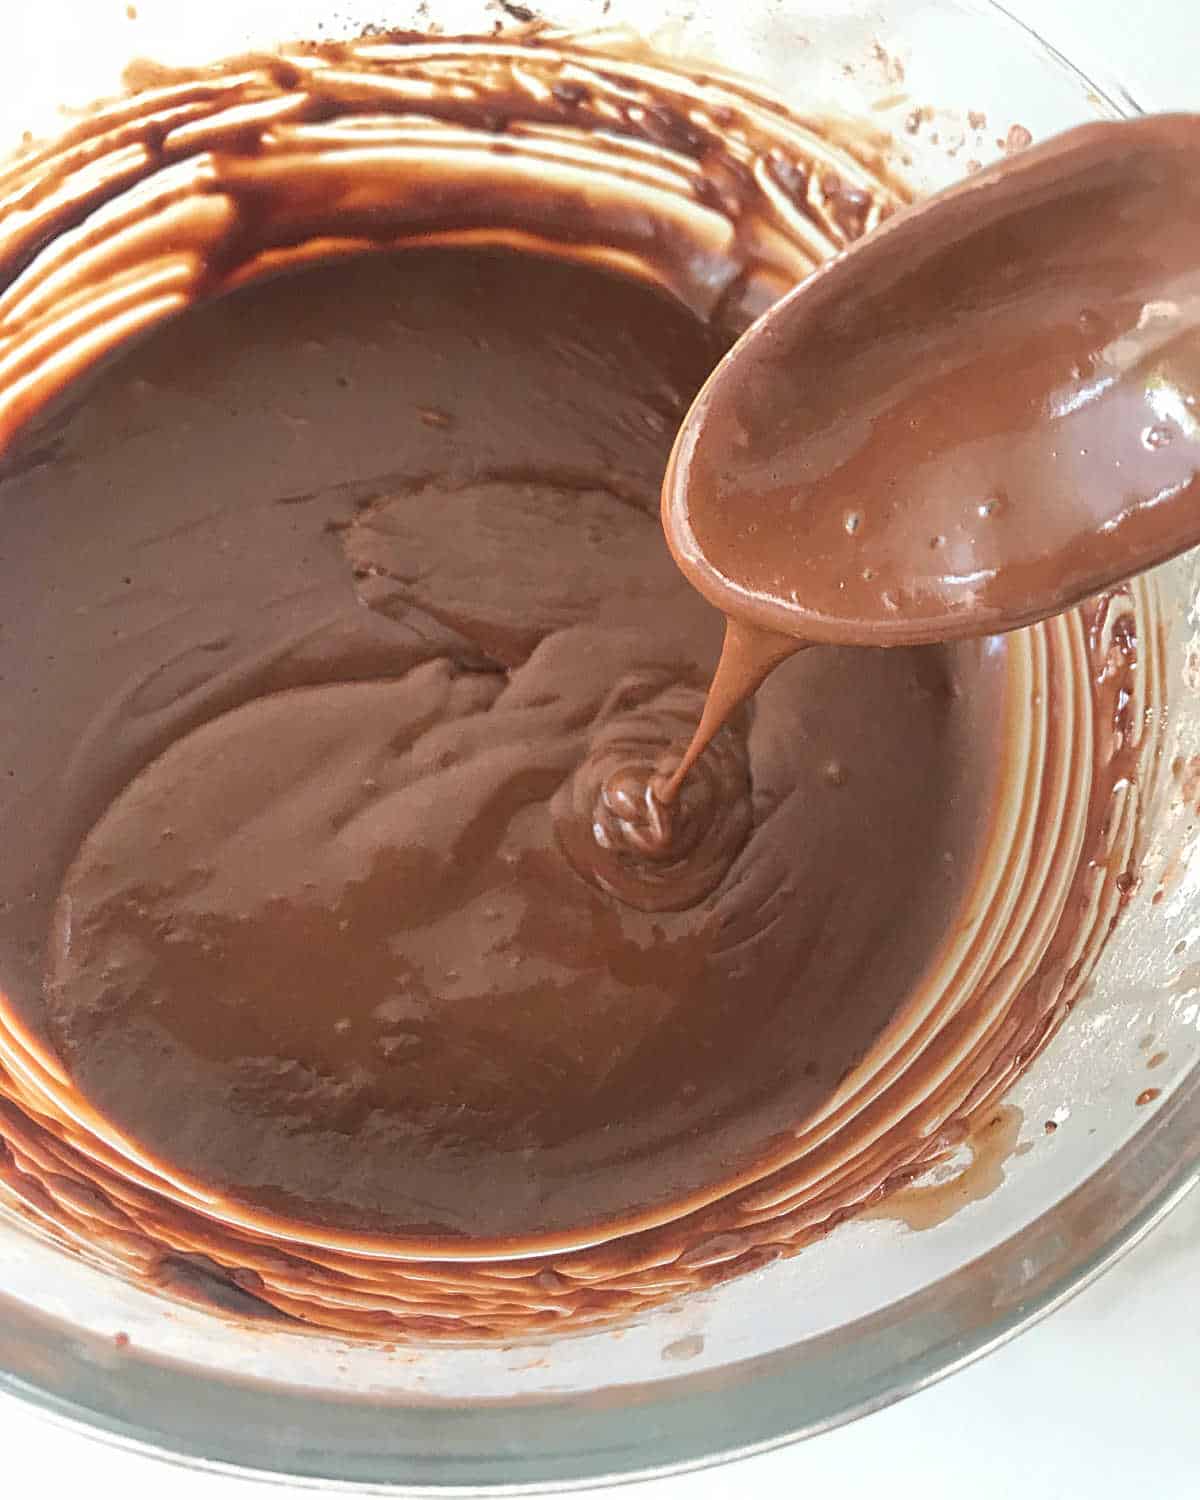 Wooden spoon lifting chocolate custard mixture from a glass bowl.